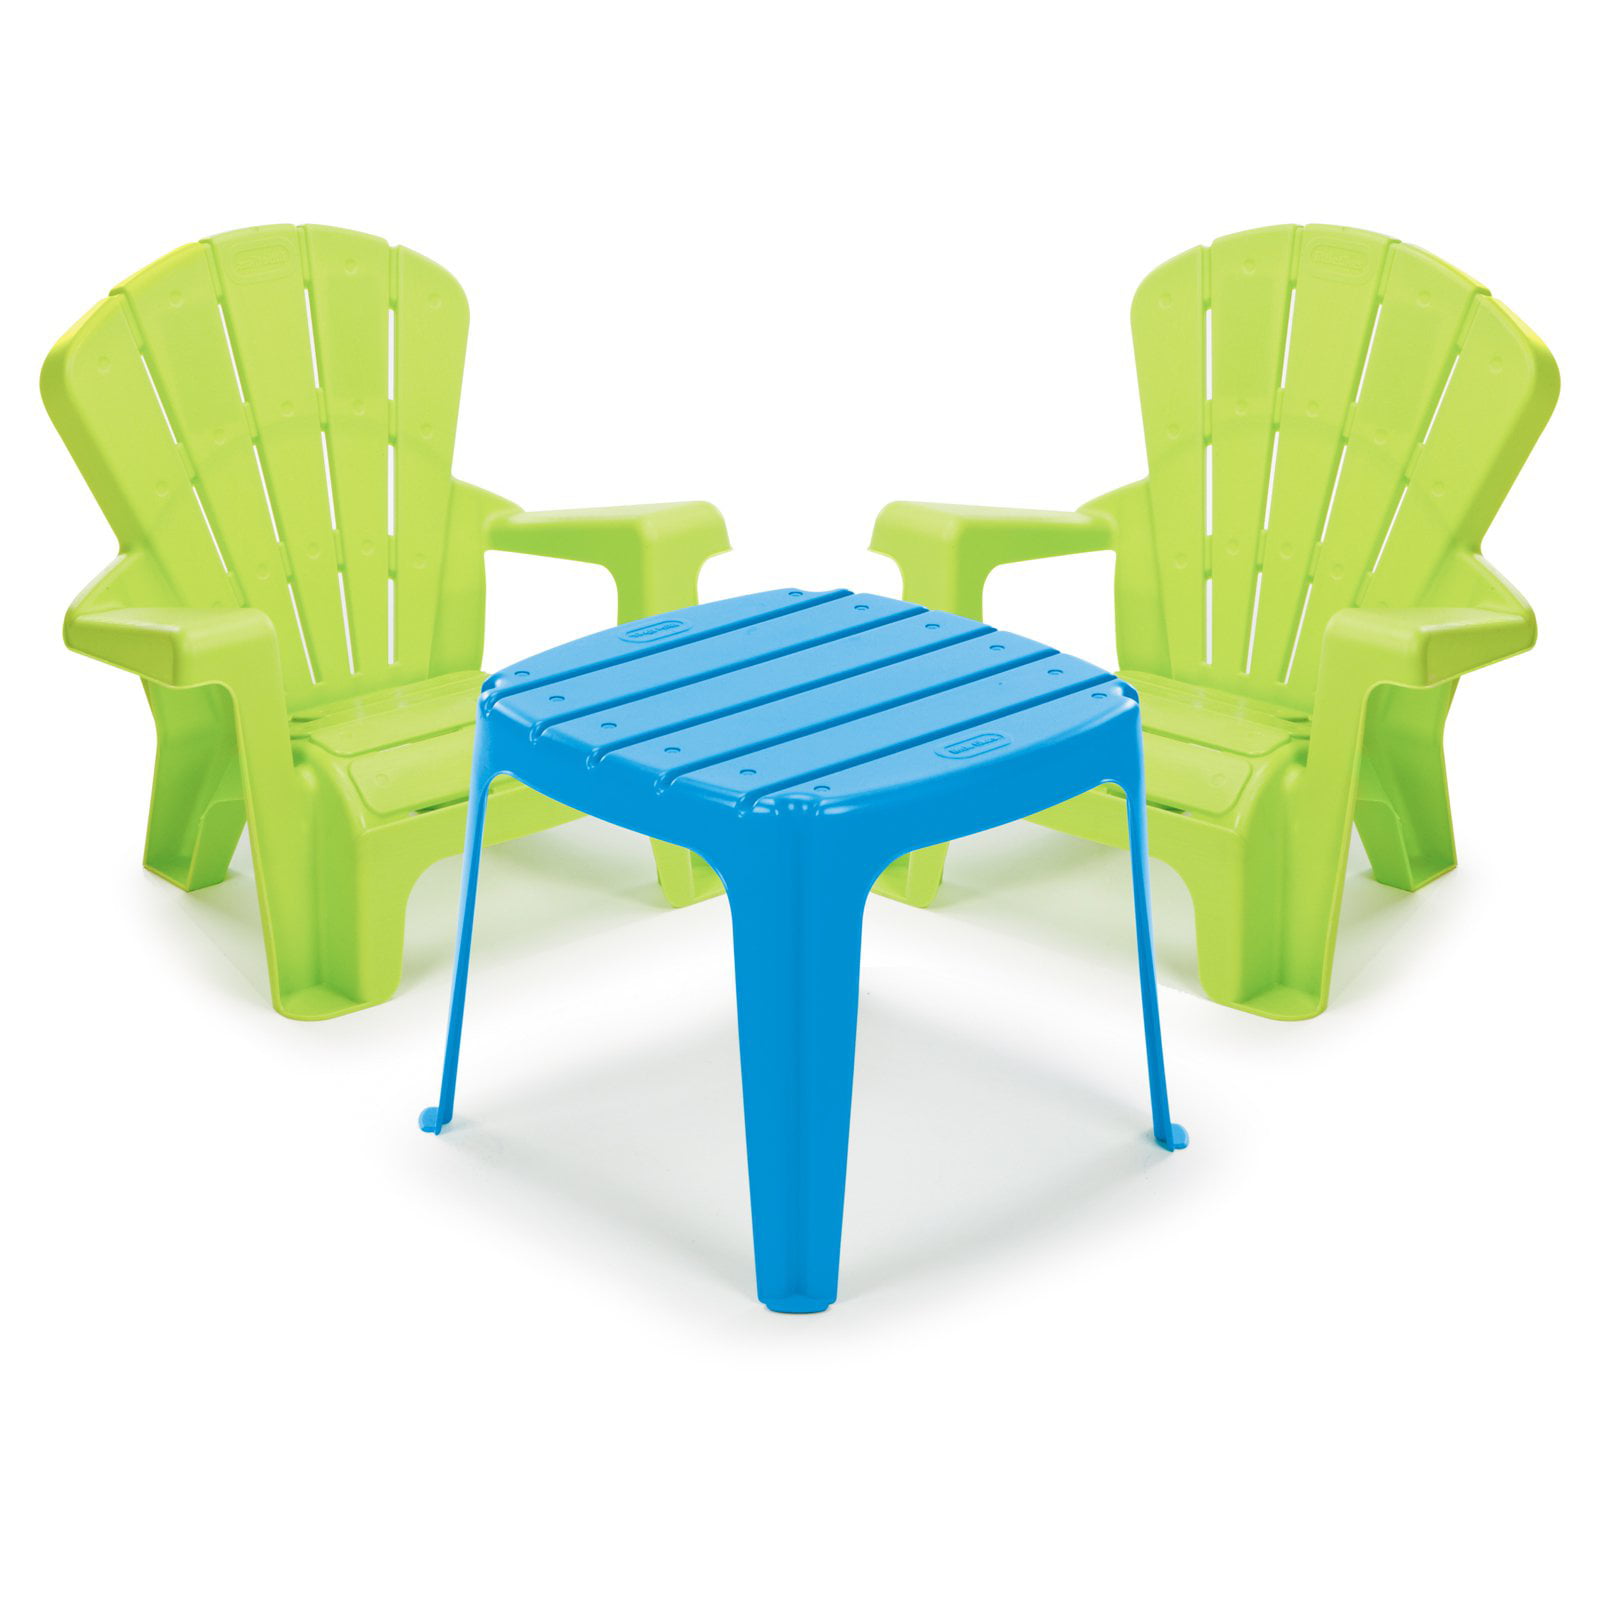 Little Tikes Garden Table and Chairs Set, Multiple Colors